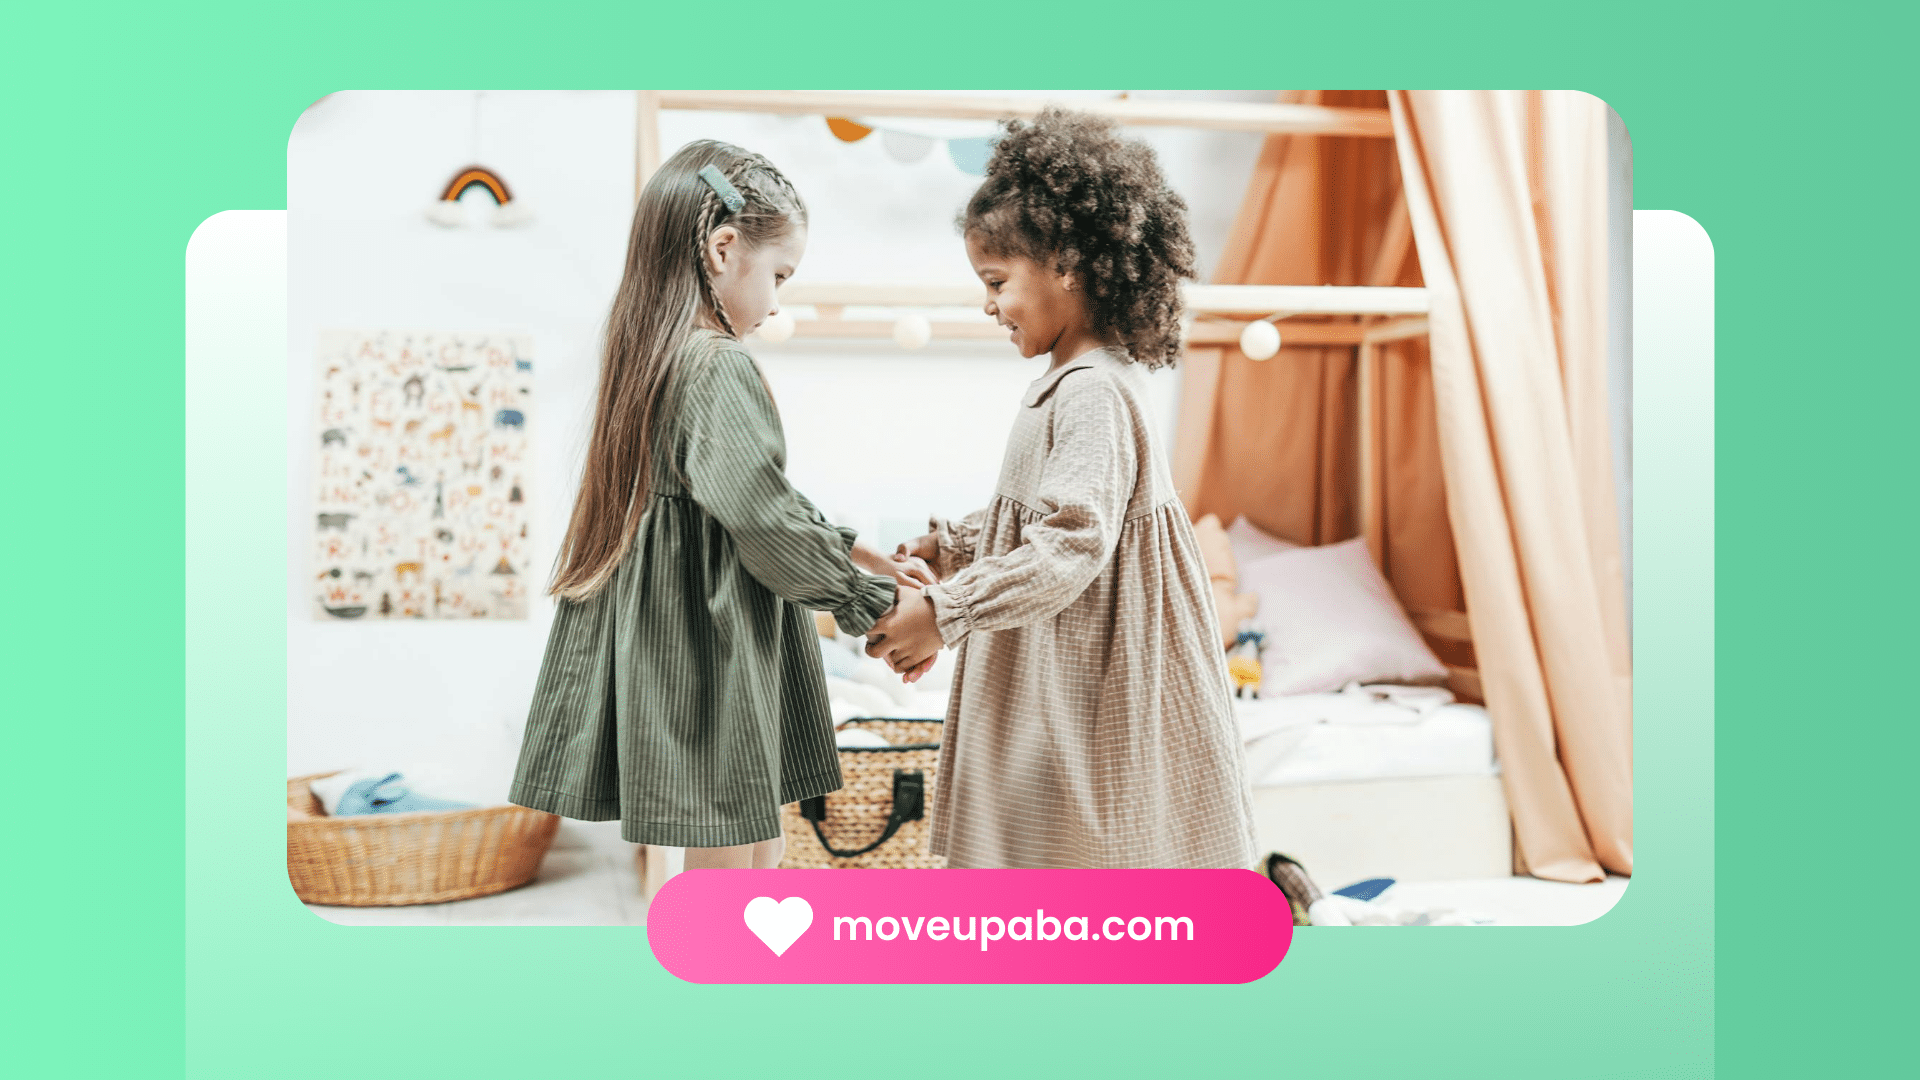 Autistic girls happily held hands in a playful room during their ABA therapy session in Maryland.